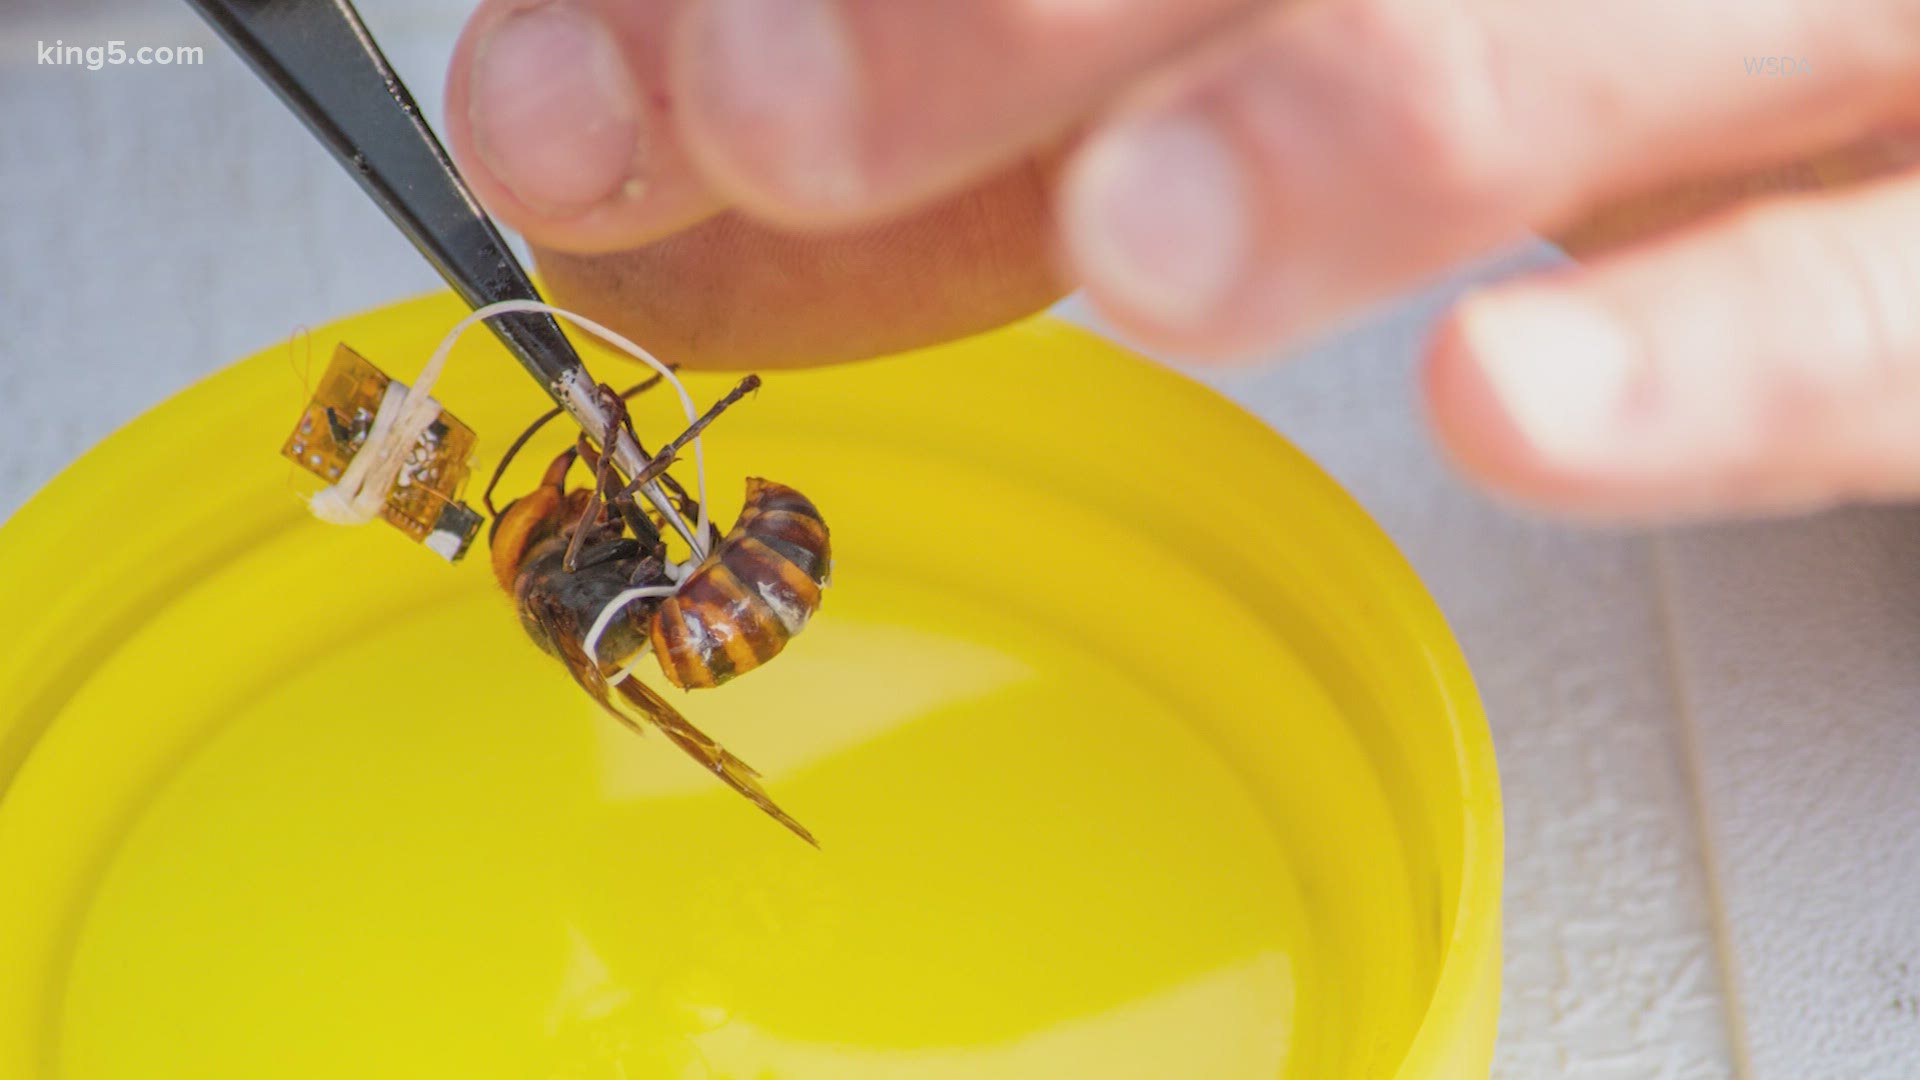 Though the invasive hornet was caught alive in Whatcom County, glue became stuck on its wing and it was unable to fly back to its colony.